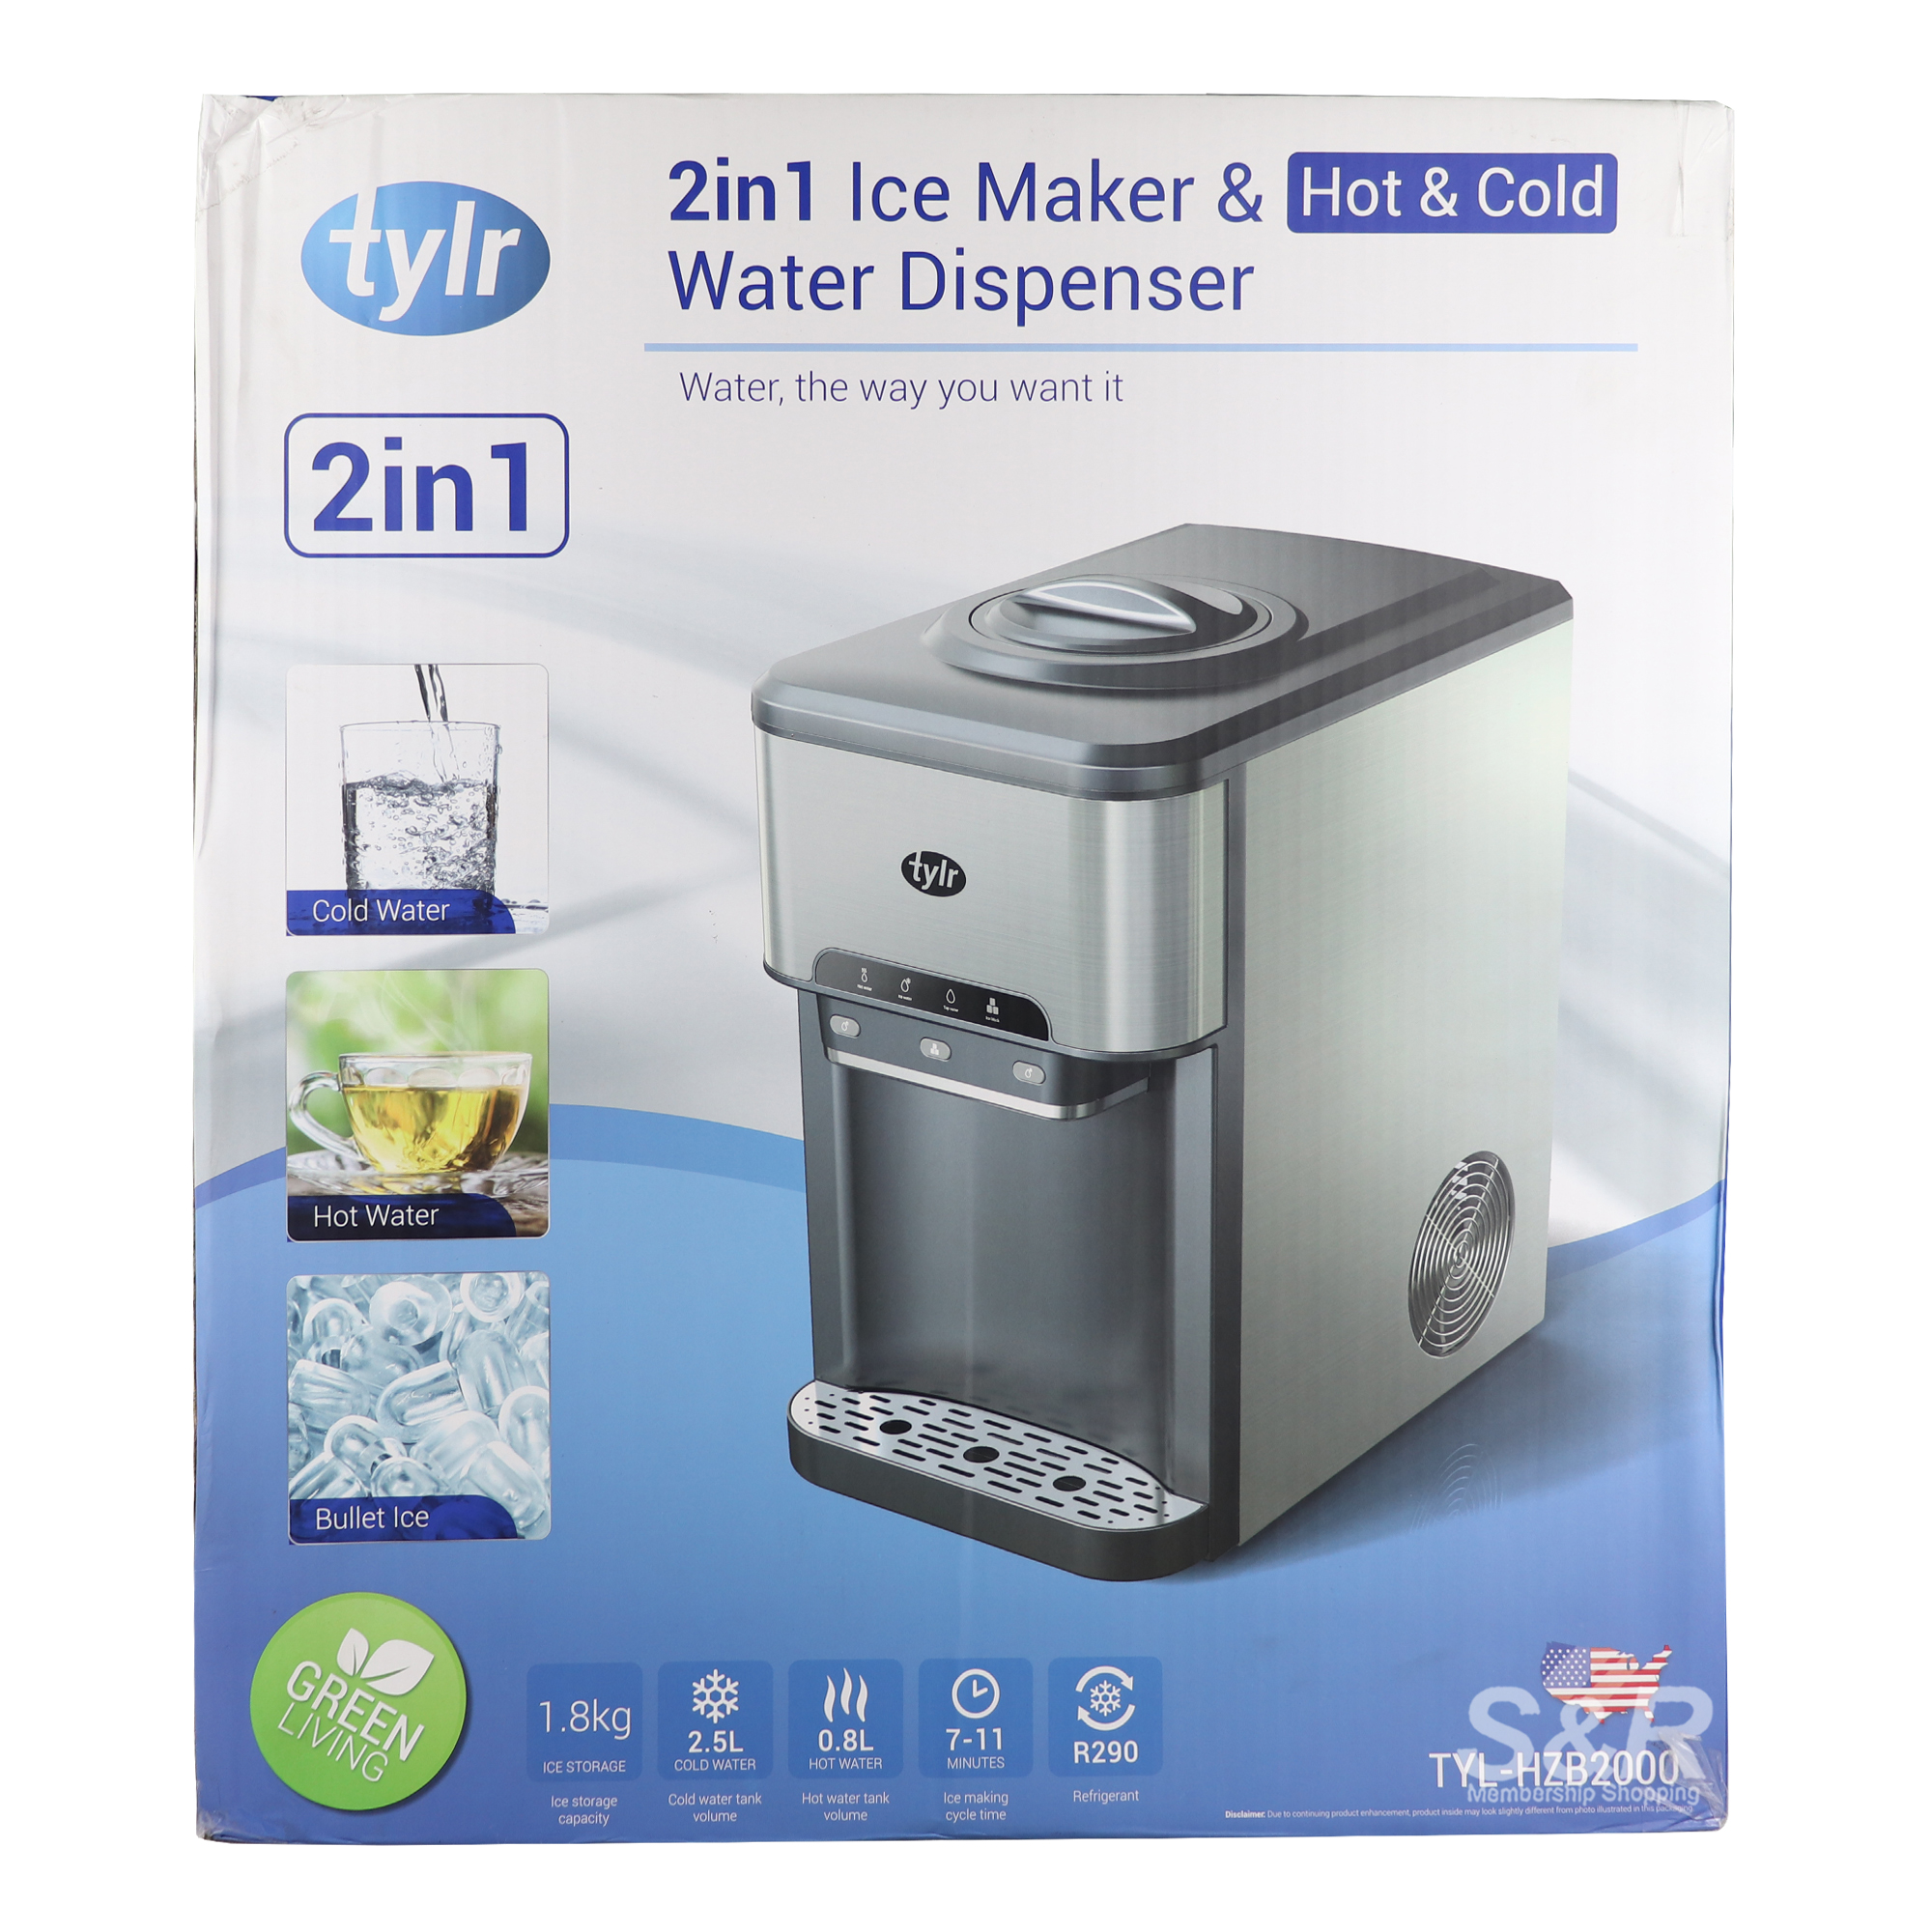 Tylr Reverse 2 in 1 Ice Maker & Hot & Cold Water Dispenser TYL-HZB2000